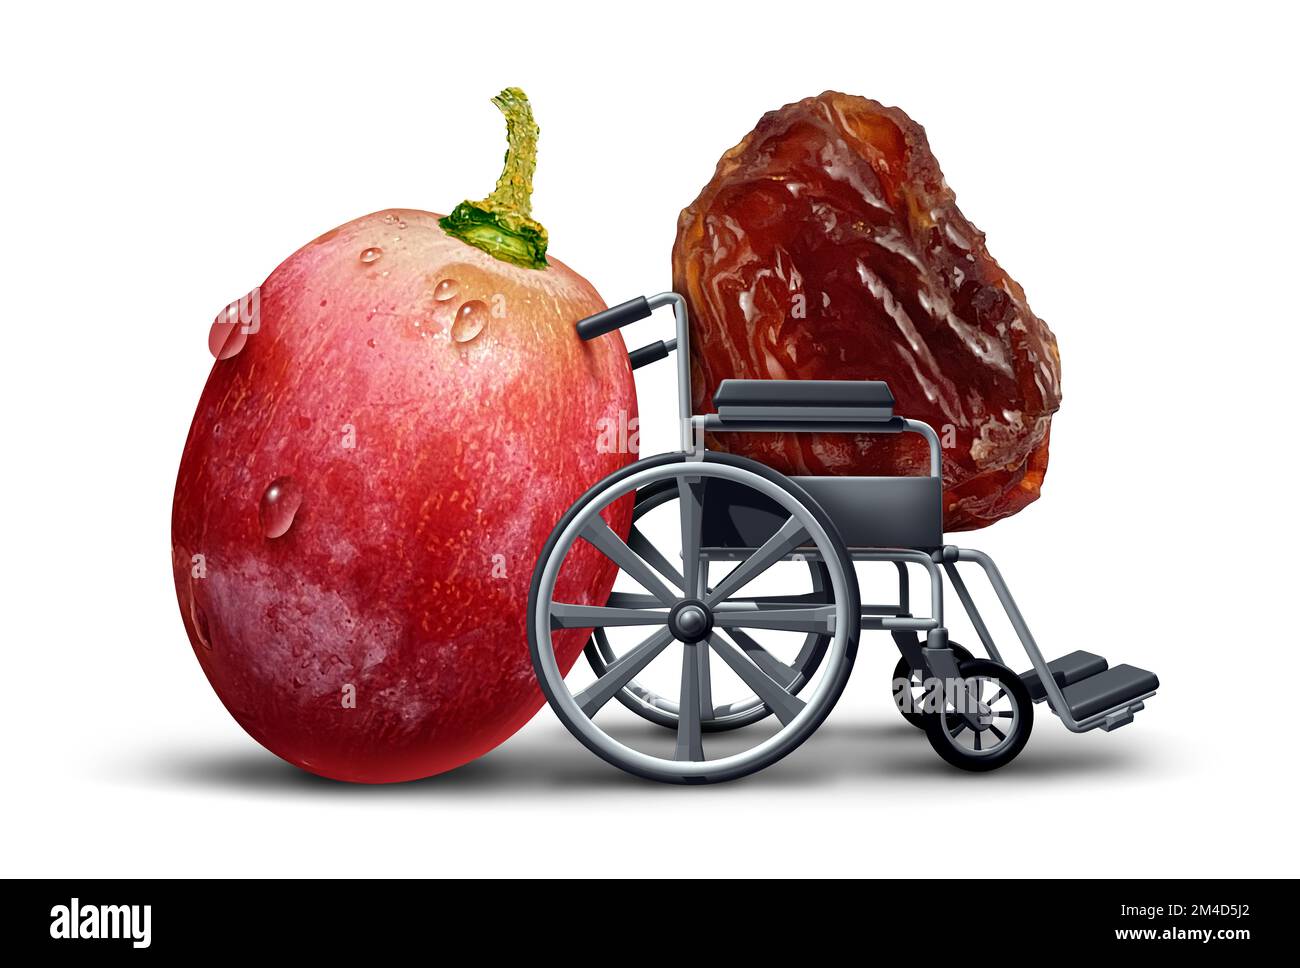 Elderly care concept as a young caregiver grape pushing a wheel chair or wheelchair carrying an old raisin as a funny  fruit image representing agiing Stock Photo